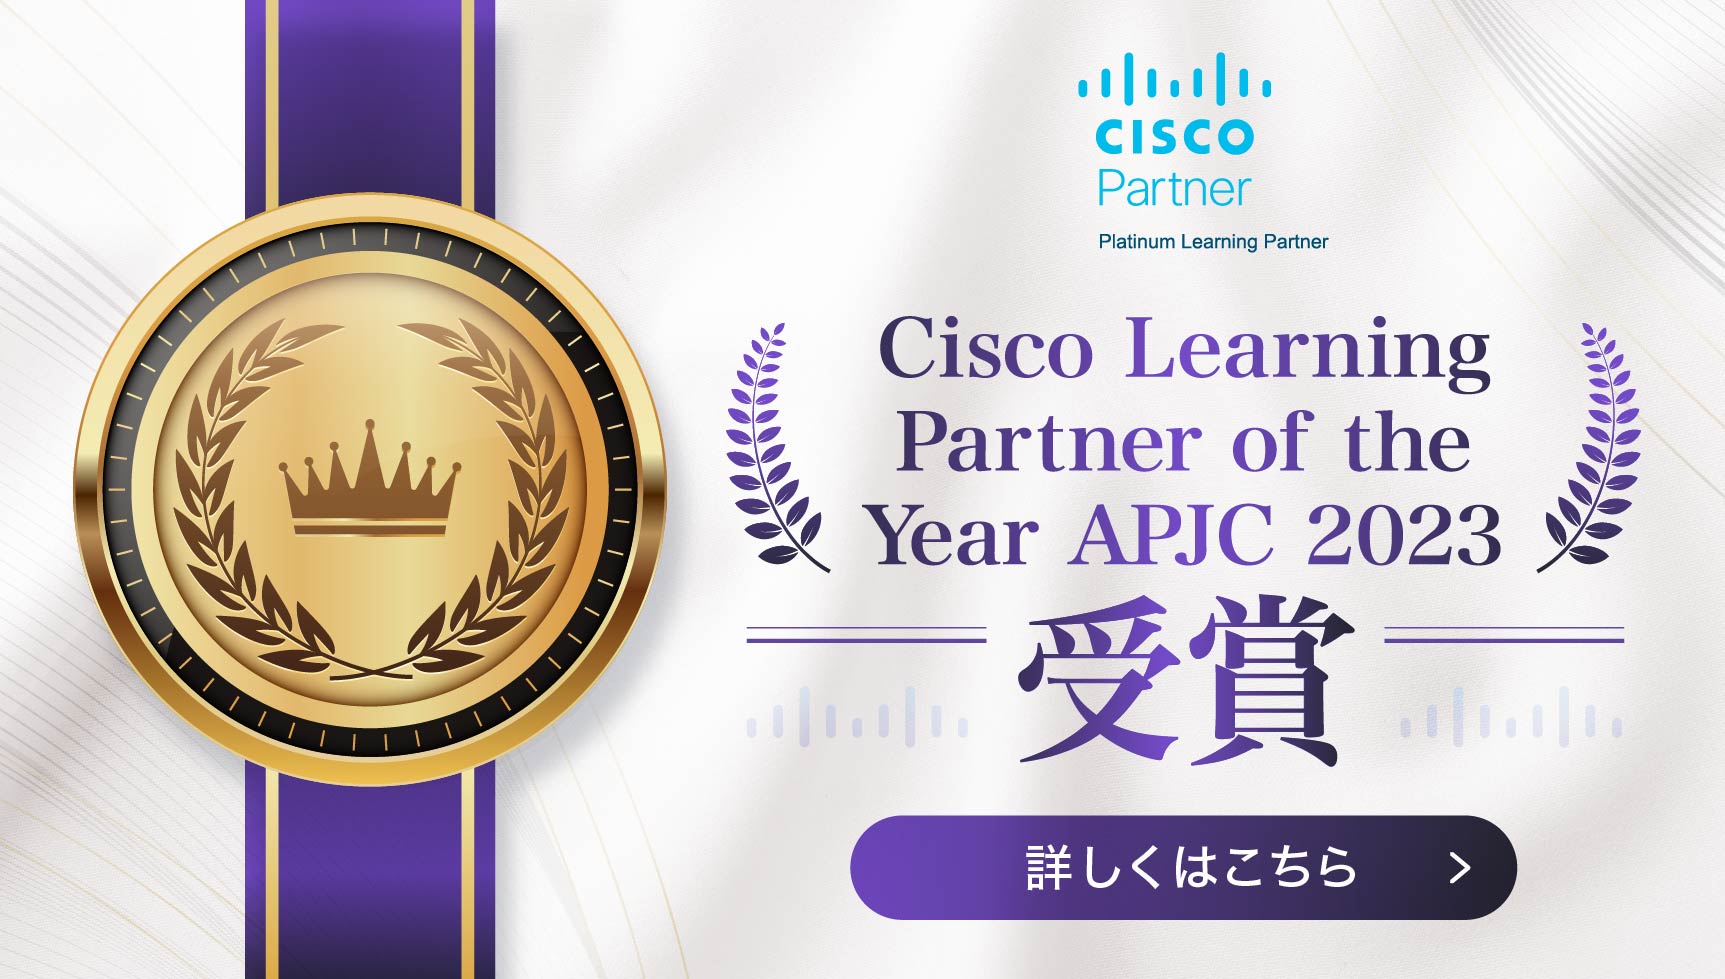 Cisco Learning Partner of the Year APJC 2023を受賞